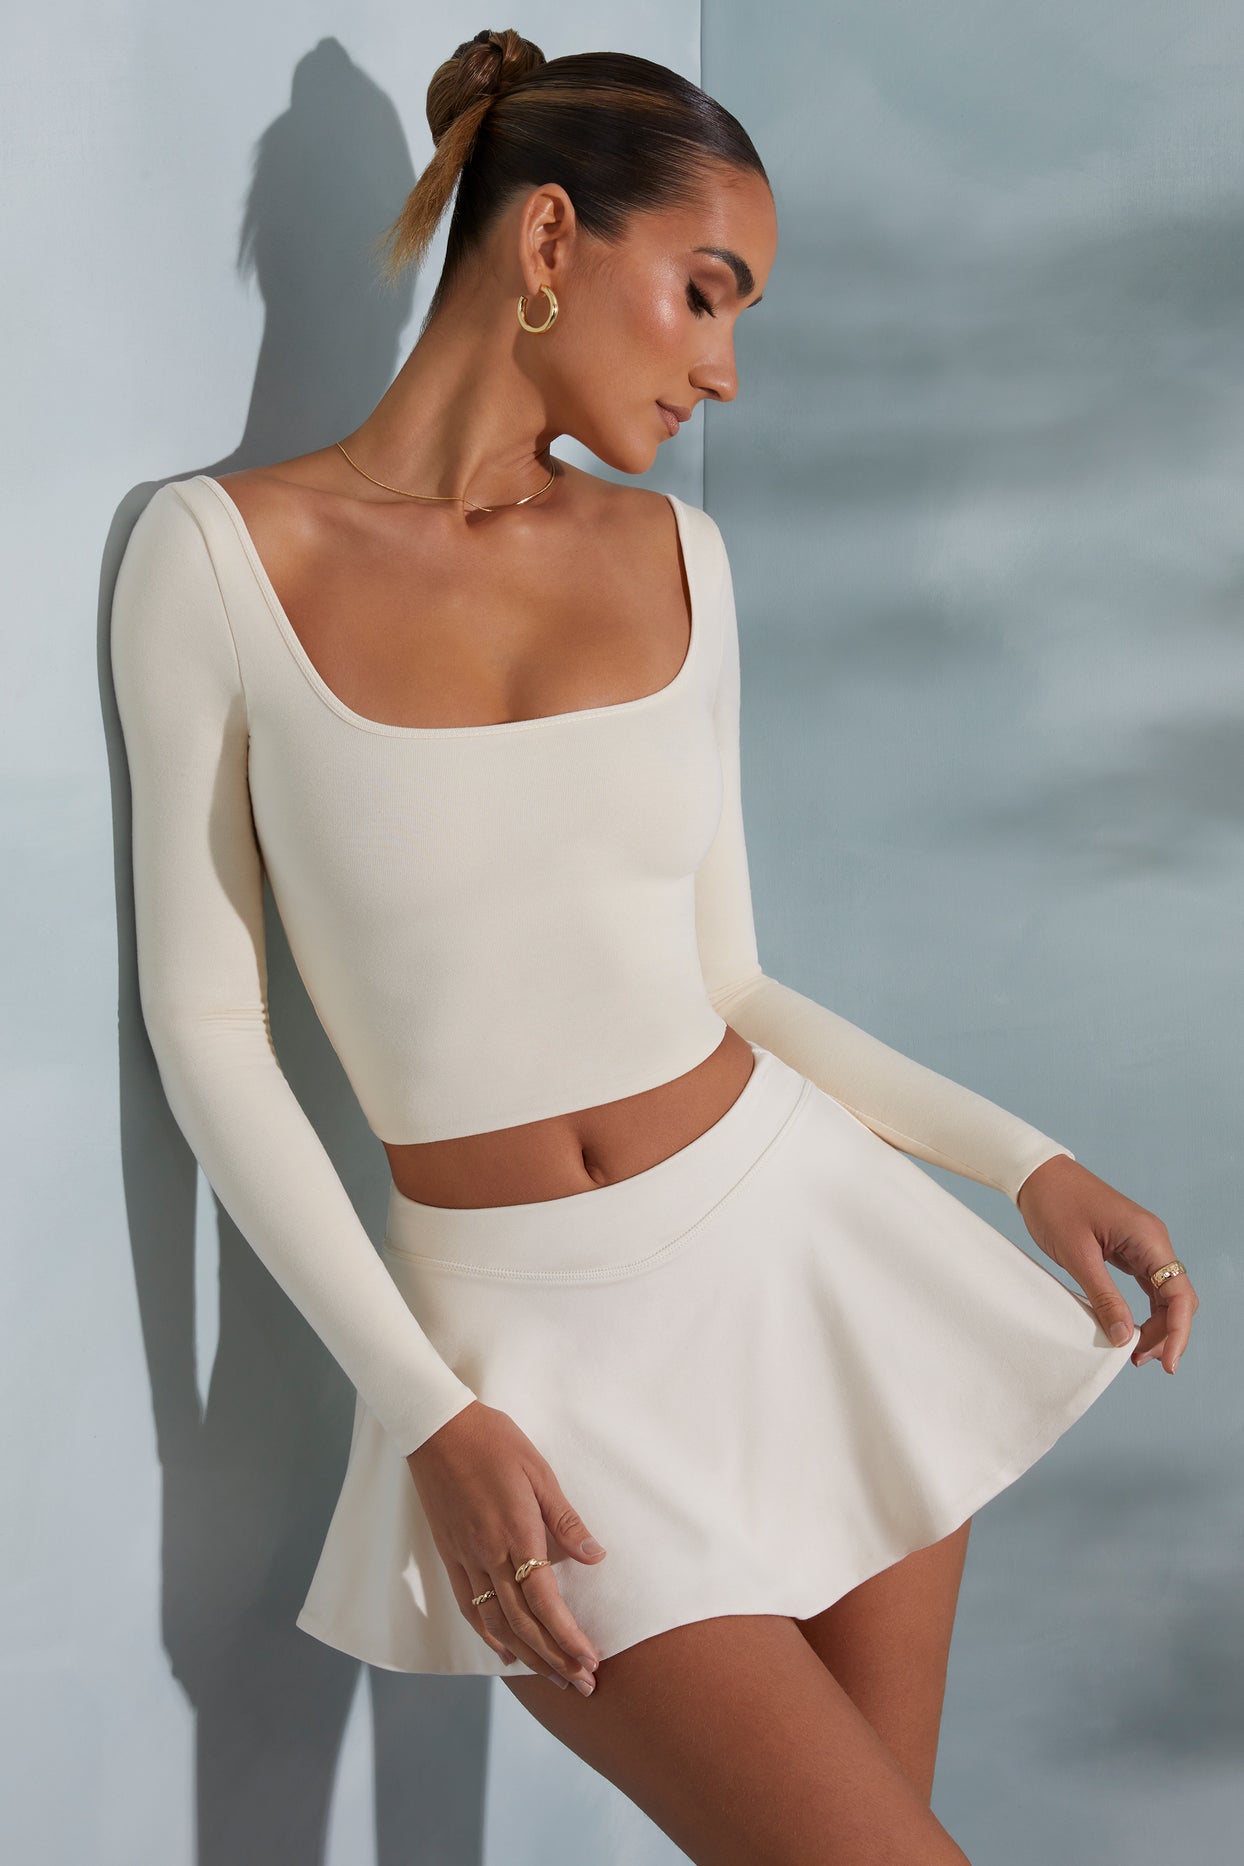 Rounded Square Neck Long Sleeve Top in Ivory